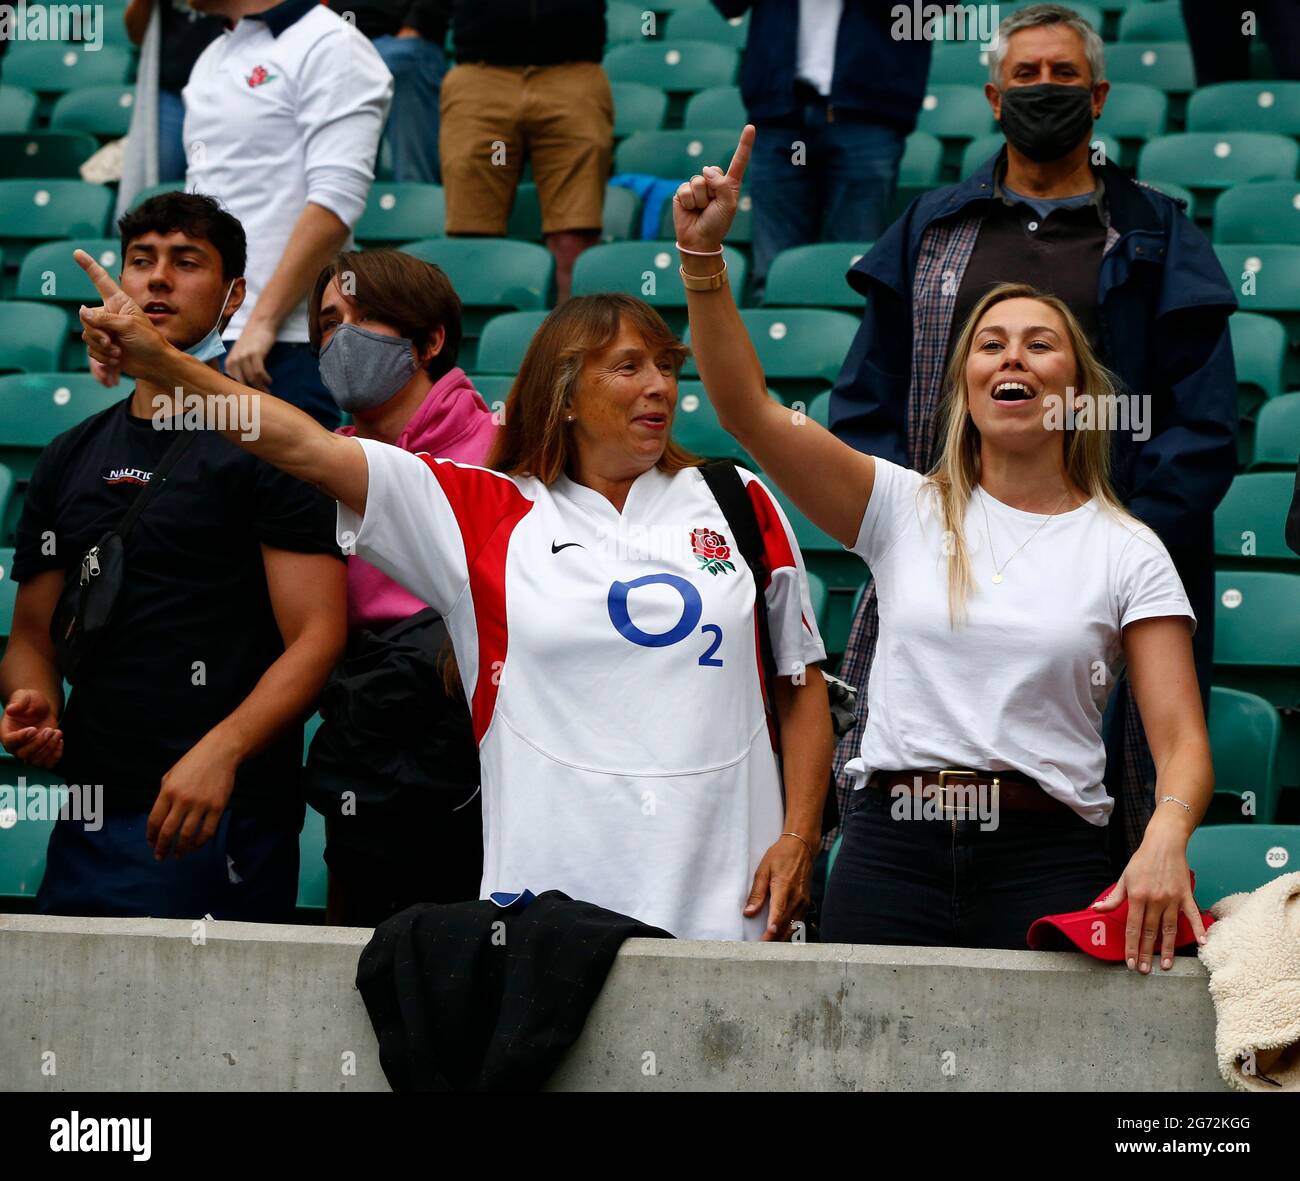 London, Inited Kingdom. 10th July, 2021. LONDON, ENGLAND - JULY 10: England Fans during International Friendly between England and Canada at Twickenham Stadium, London, UK on 10th July 2021 Credit: Action Foto Sport/Alamy Live News Stock Photo